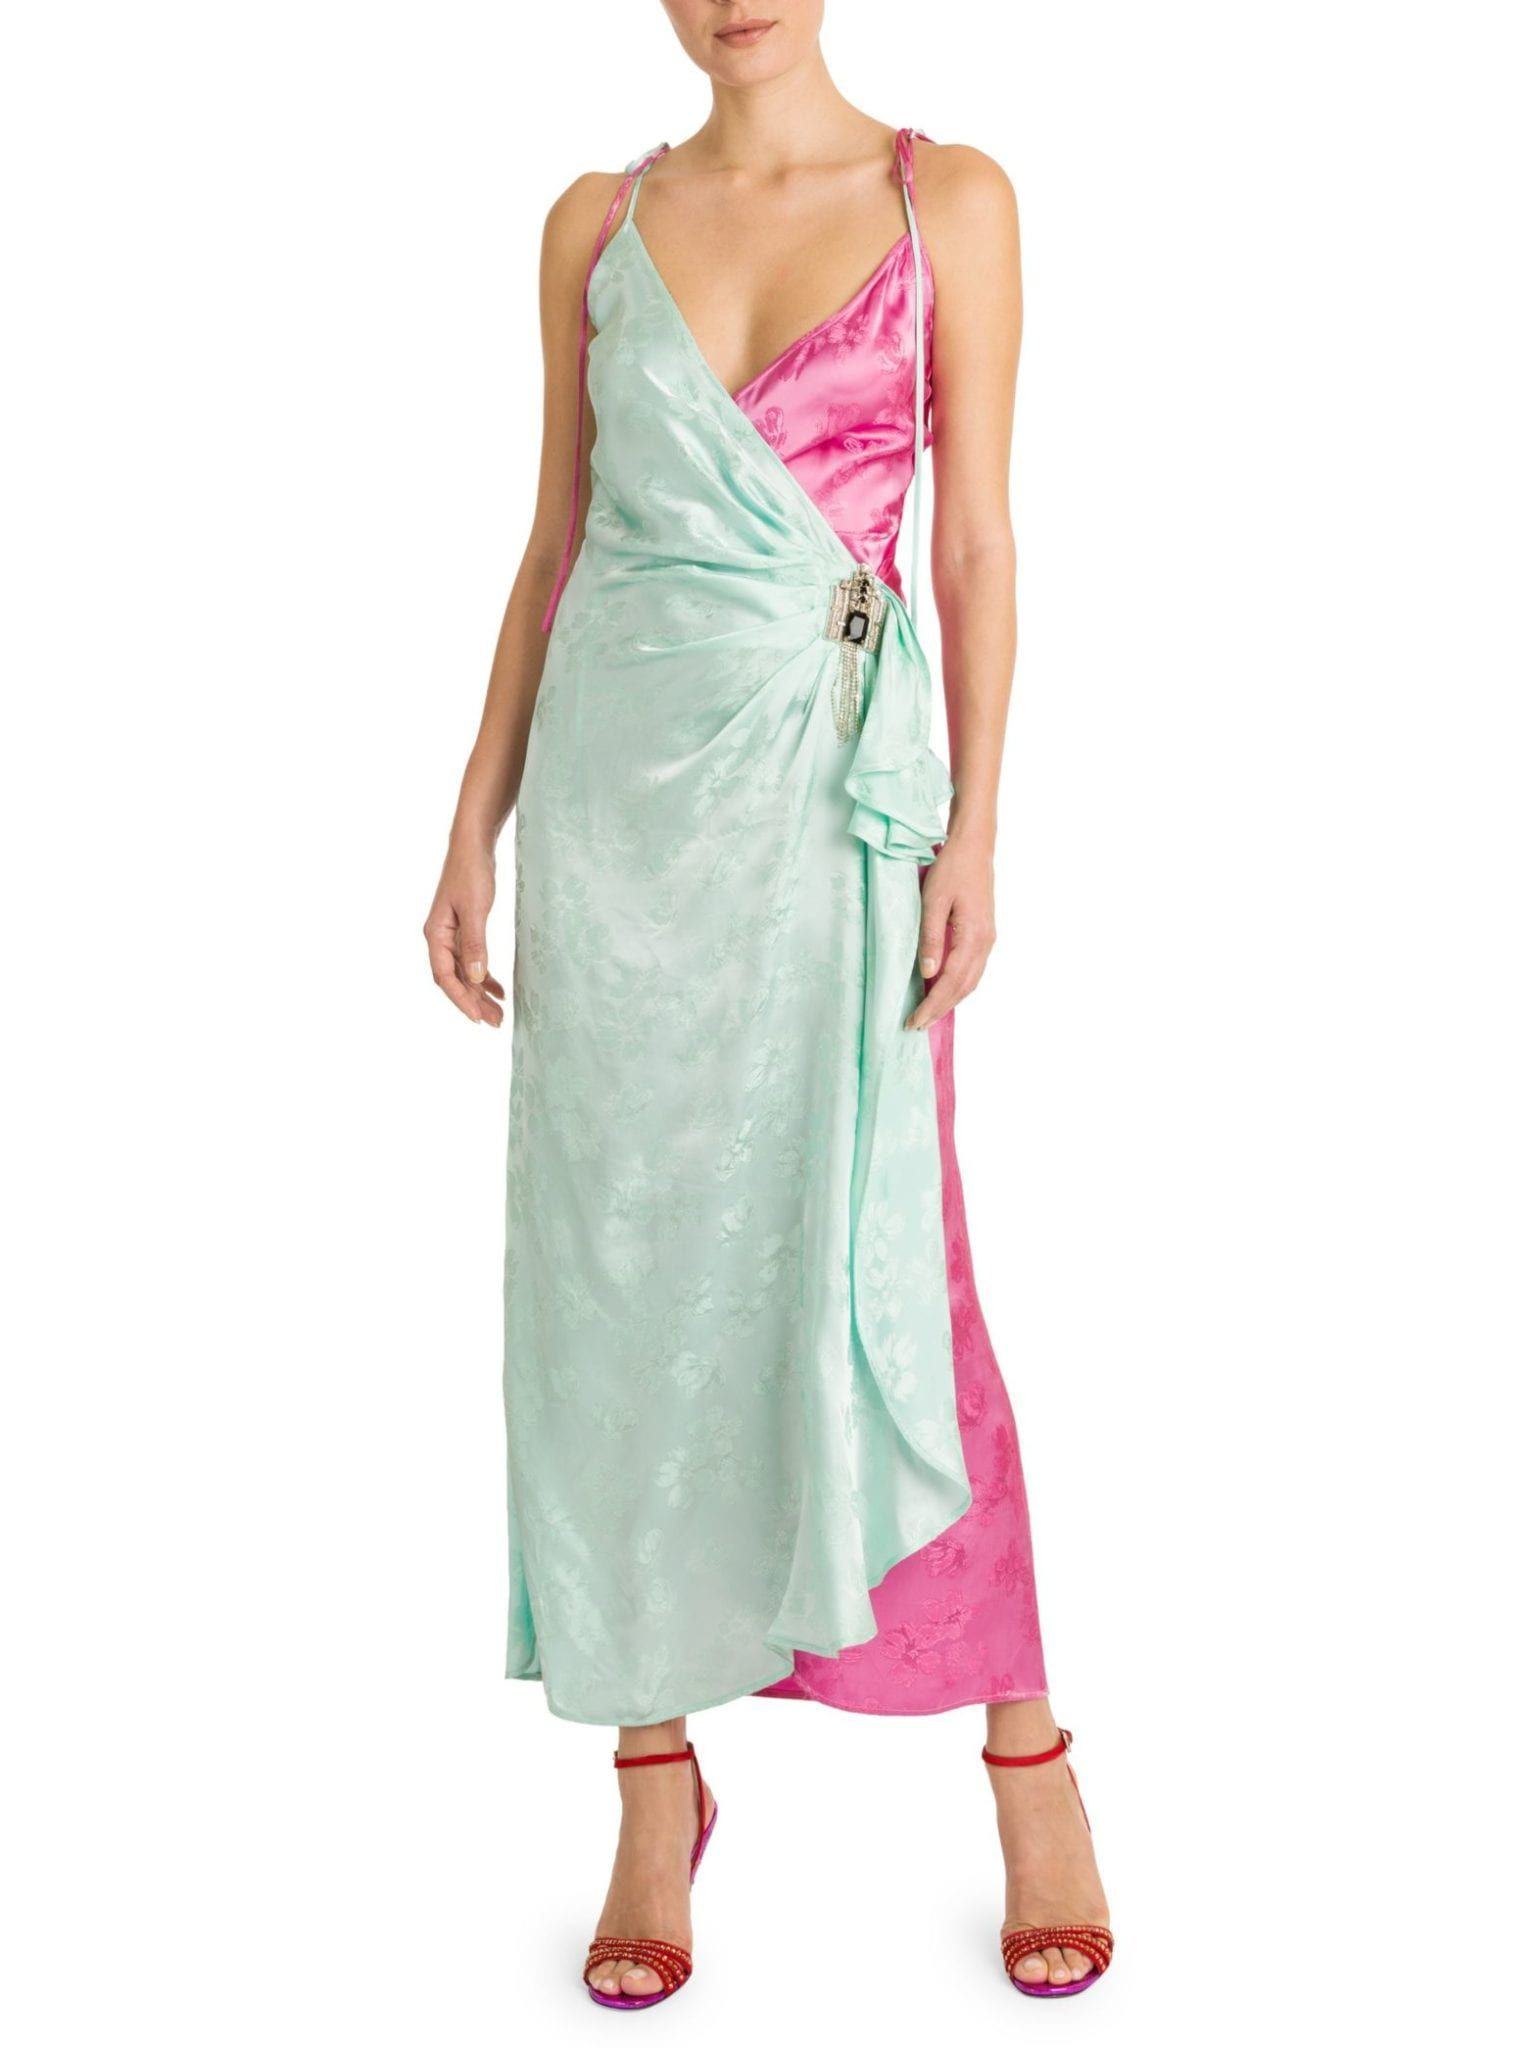 Maxi Dresses  Page 9 Of 25  We Select Dresses In 2020